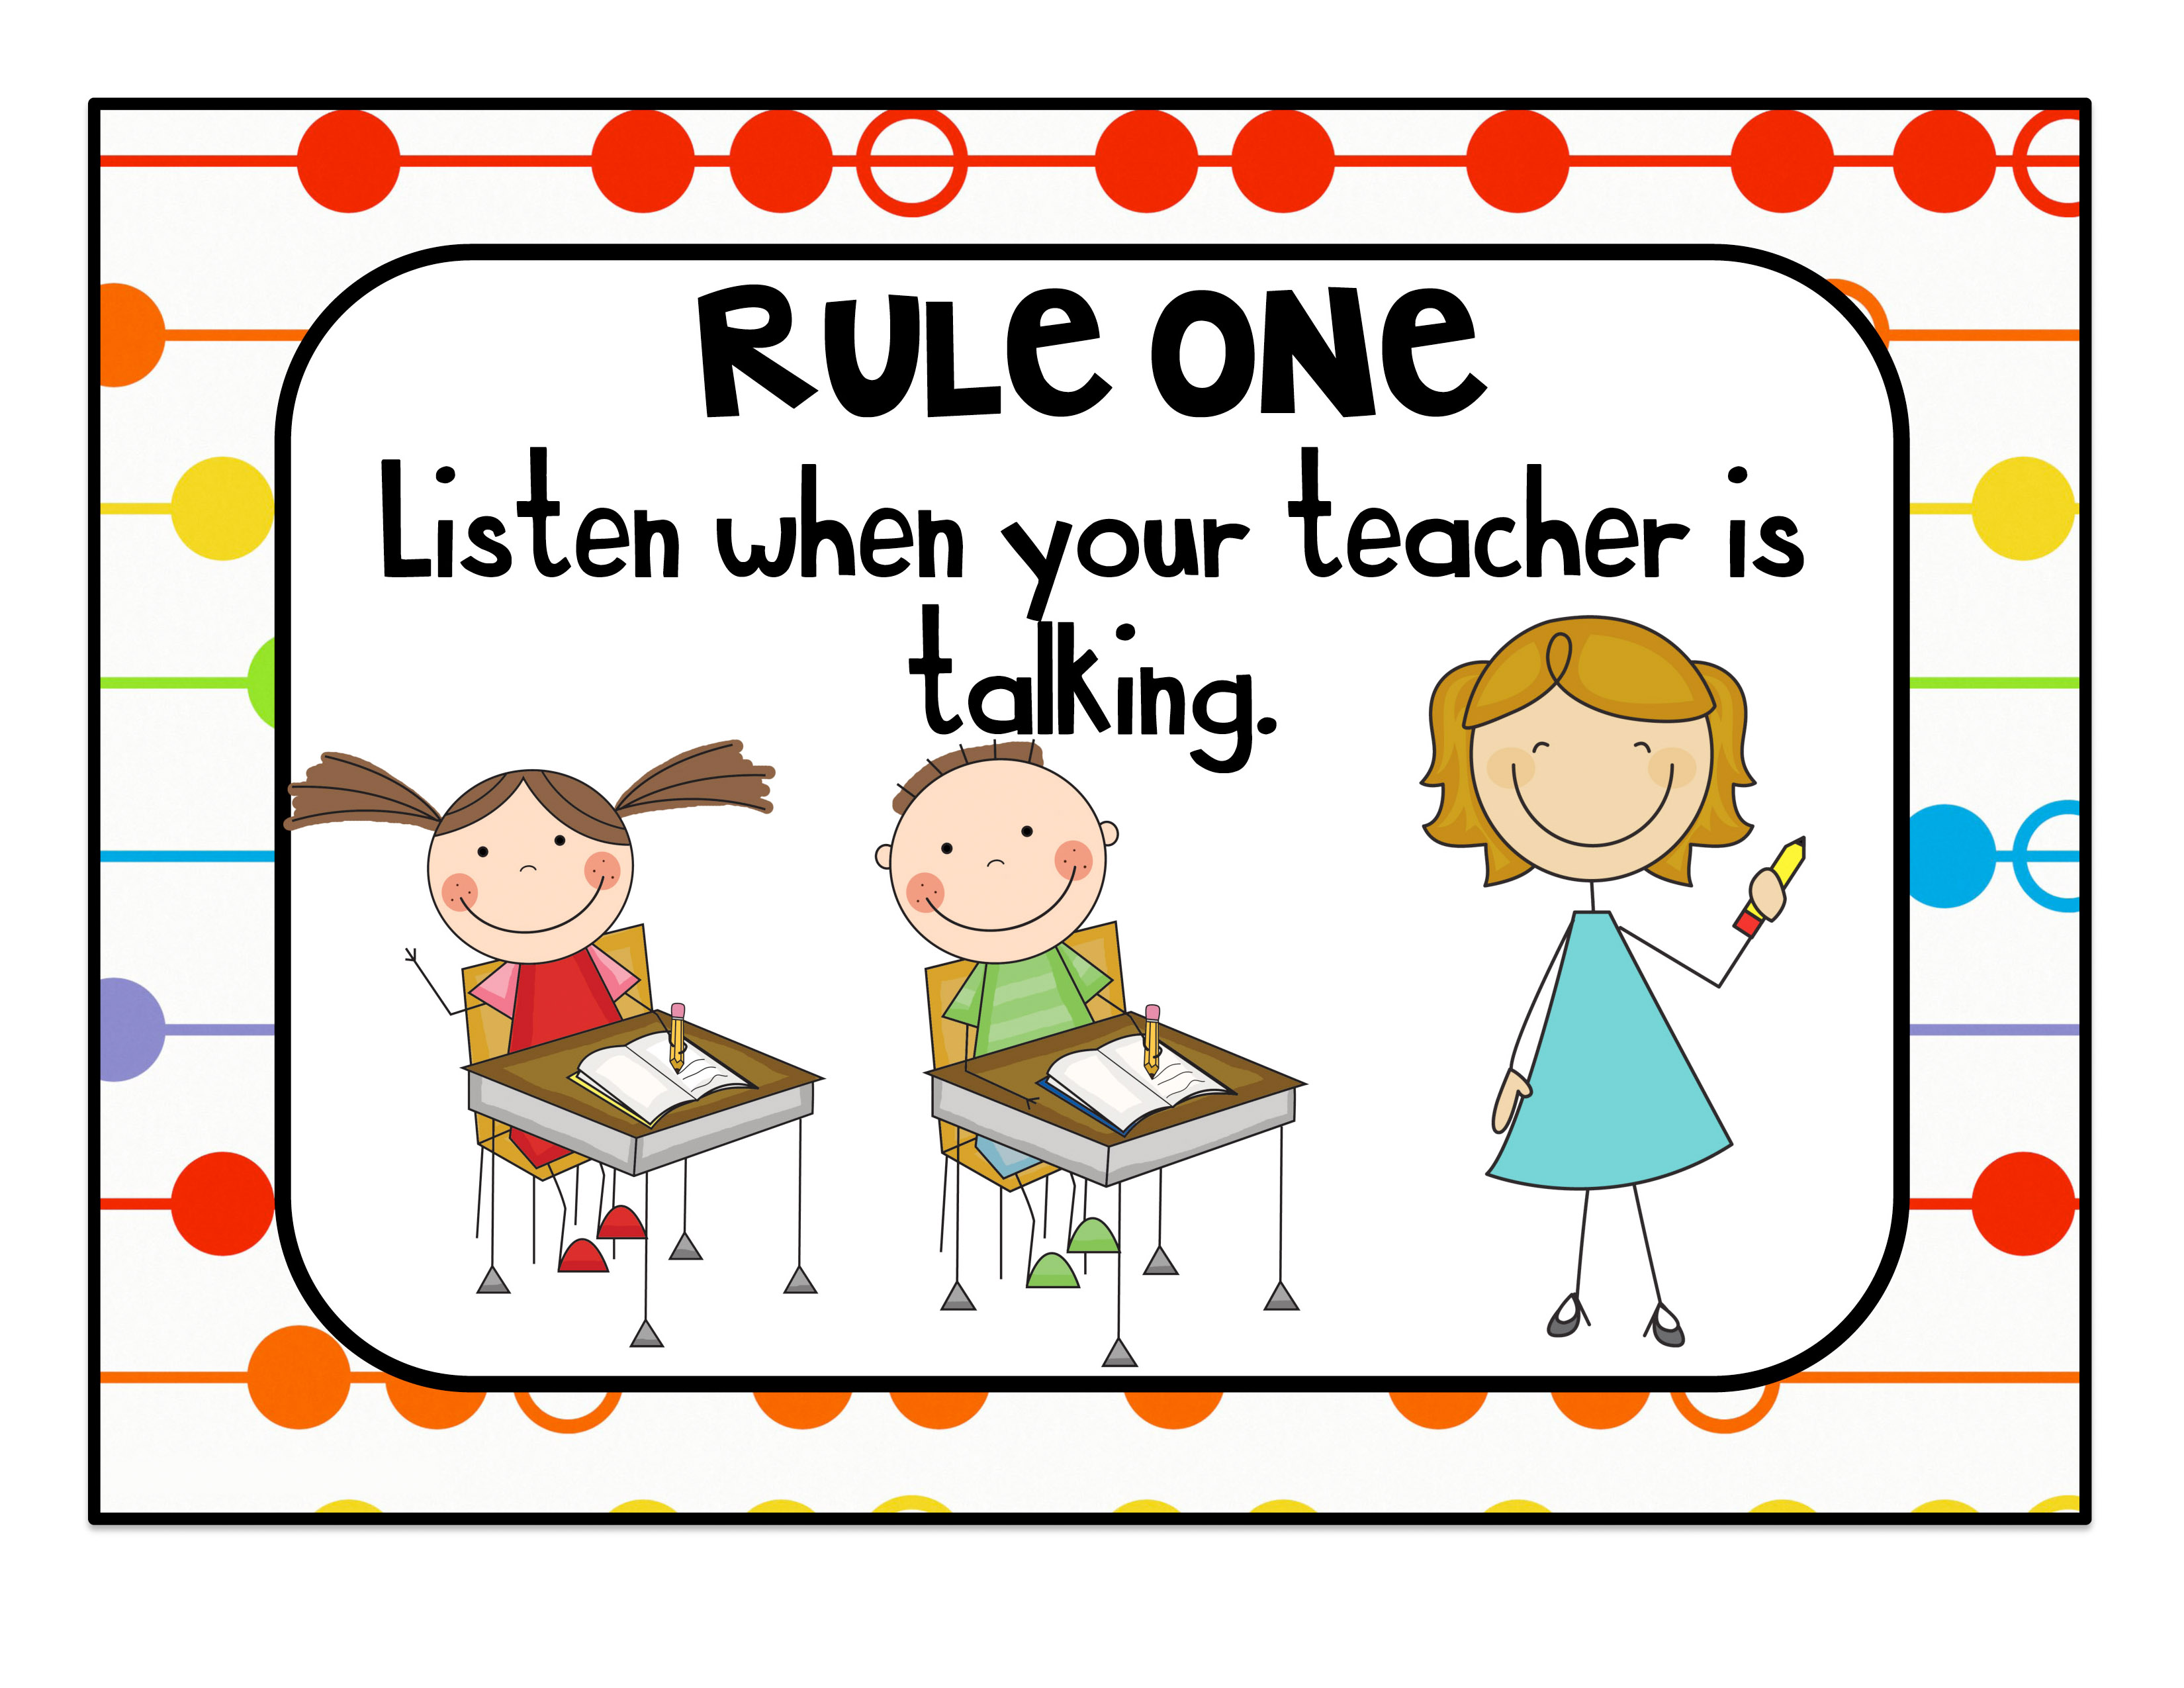 Classroom Rules. Rules in the Classroom for children. Rules in the Classroom. Classroom Rules for pupils. What did our teacher